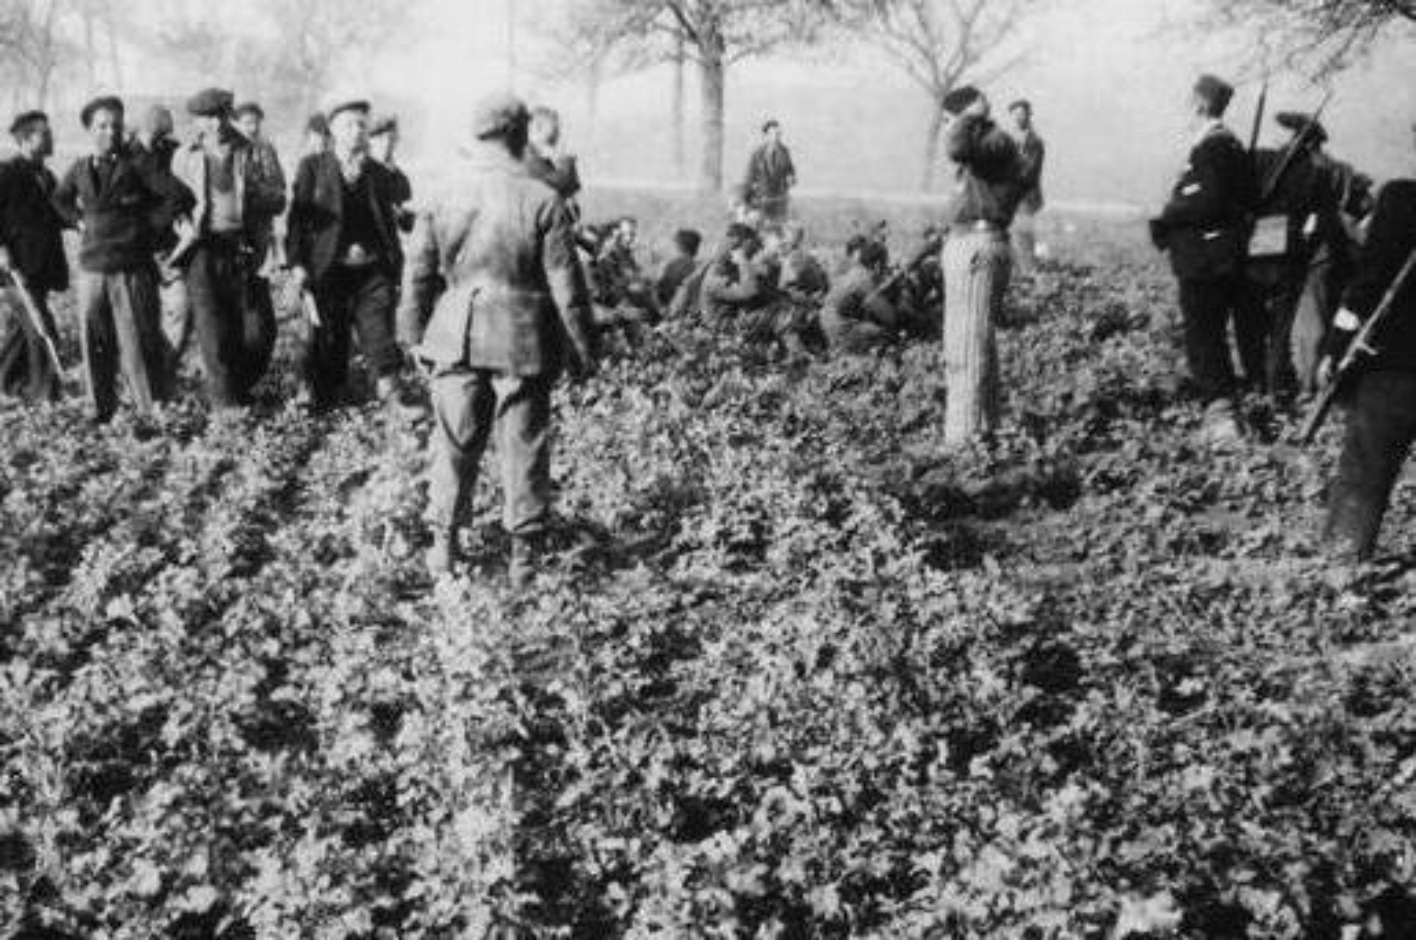 Prisoners armed with rifles capture SS men. The latter kneel in a field. 